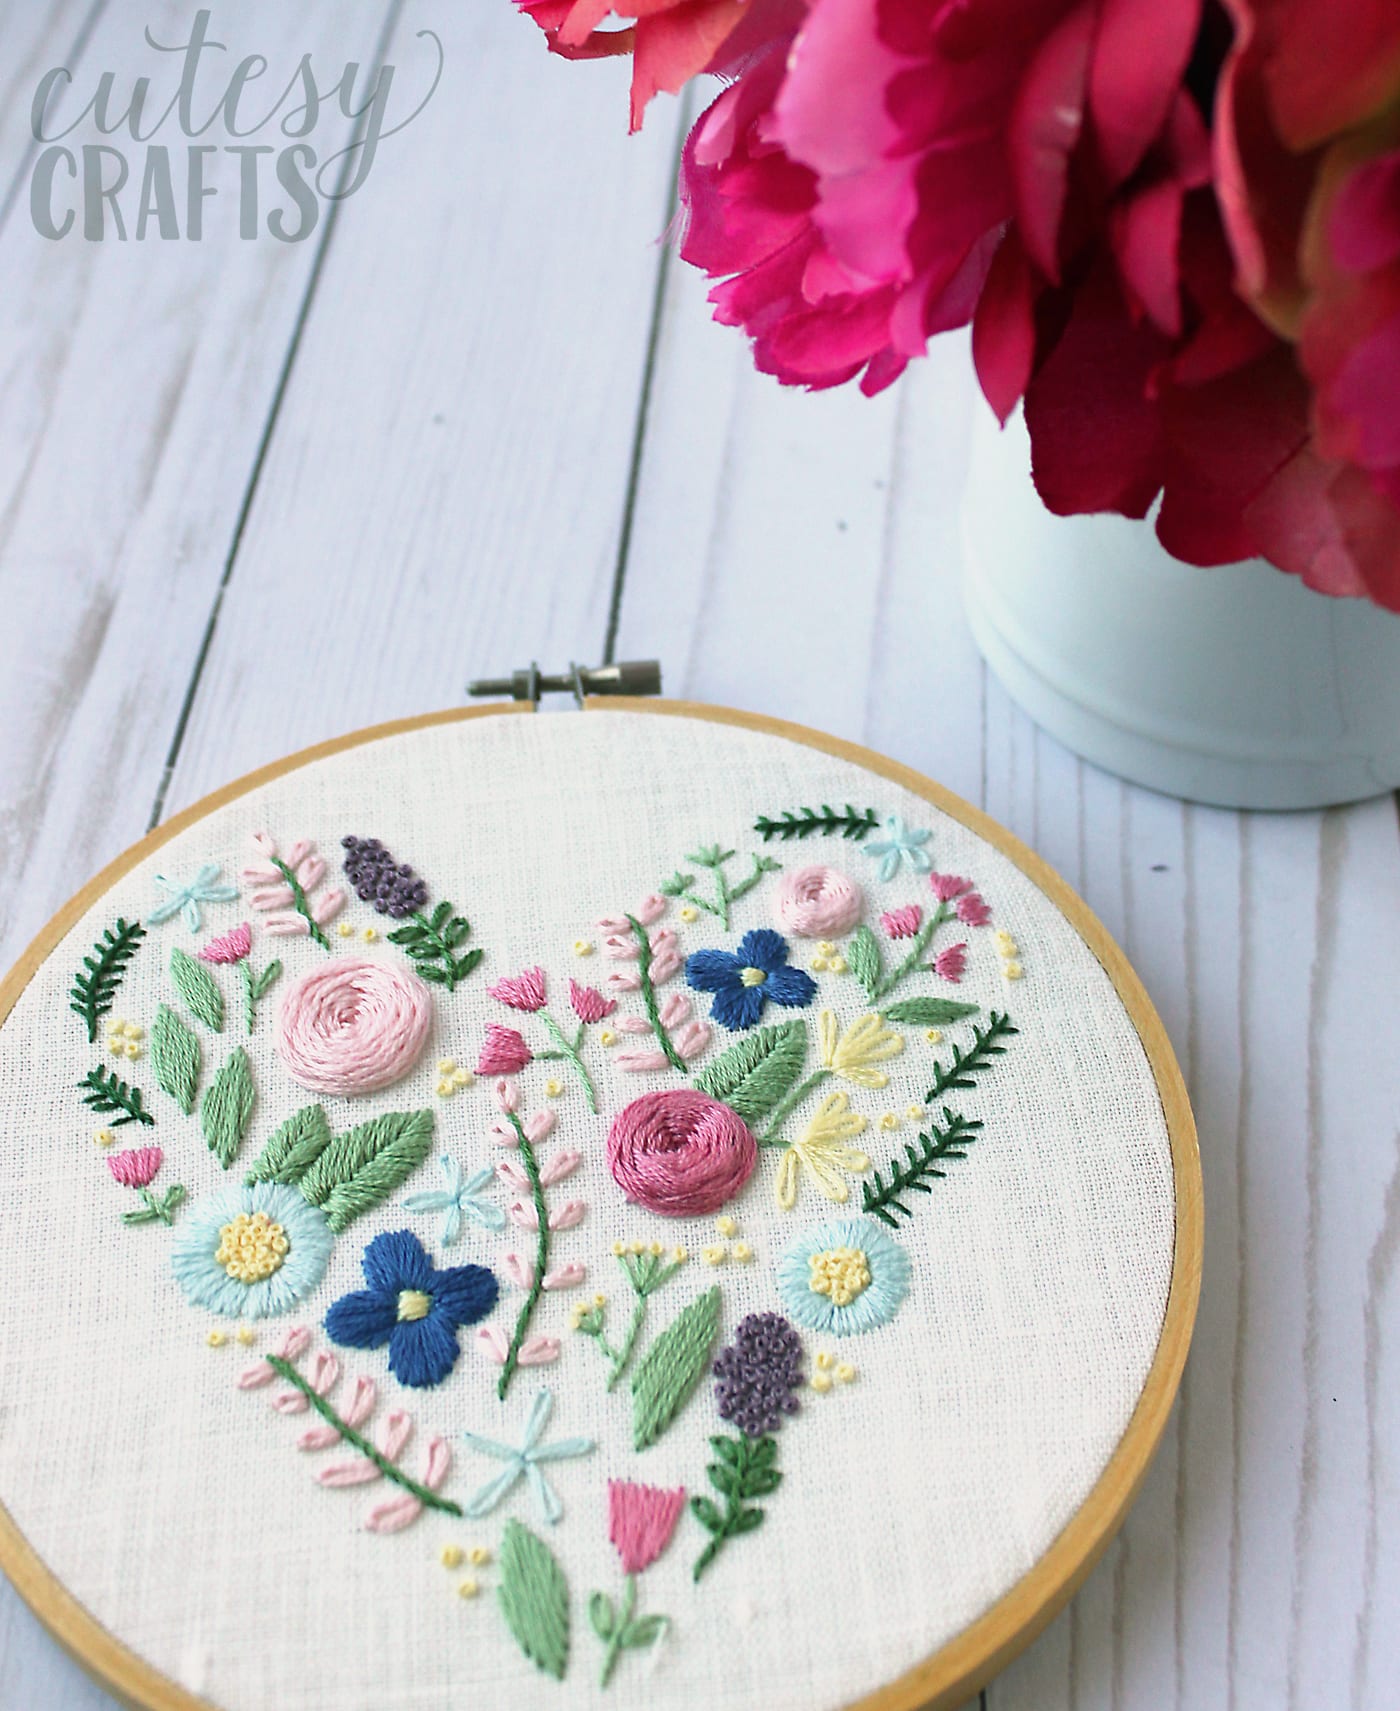 Floral Heart Hand Embroidery Pattern - The Polka Dot Chair